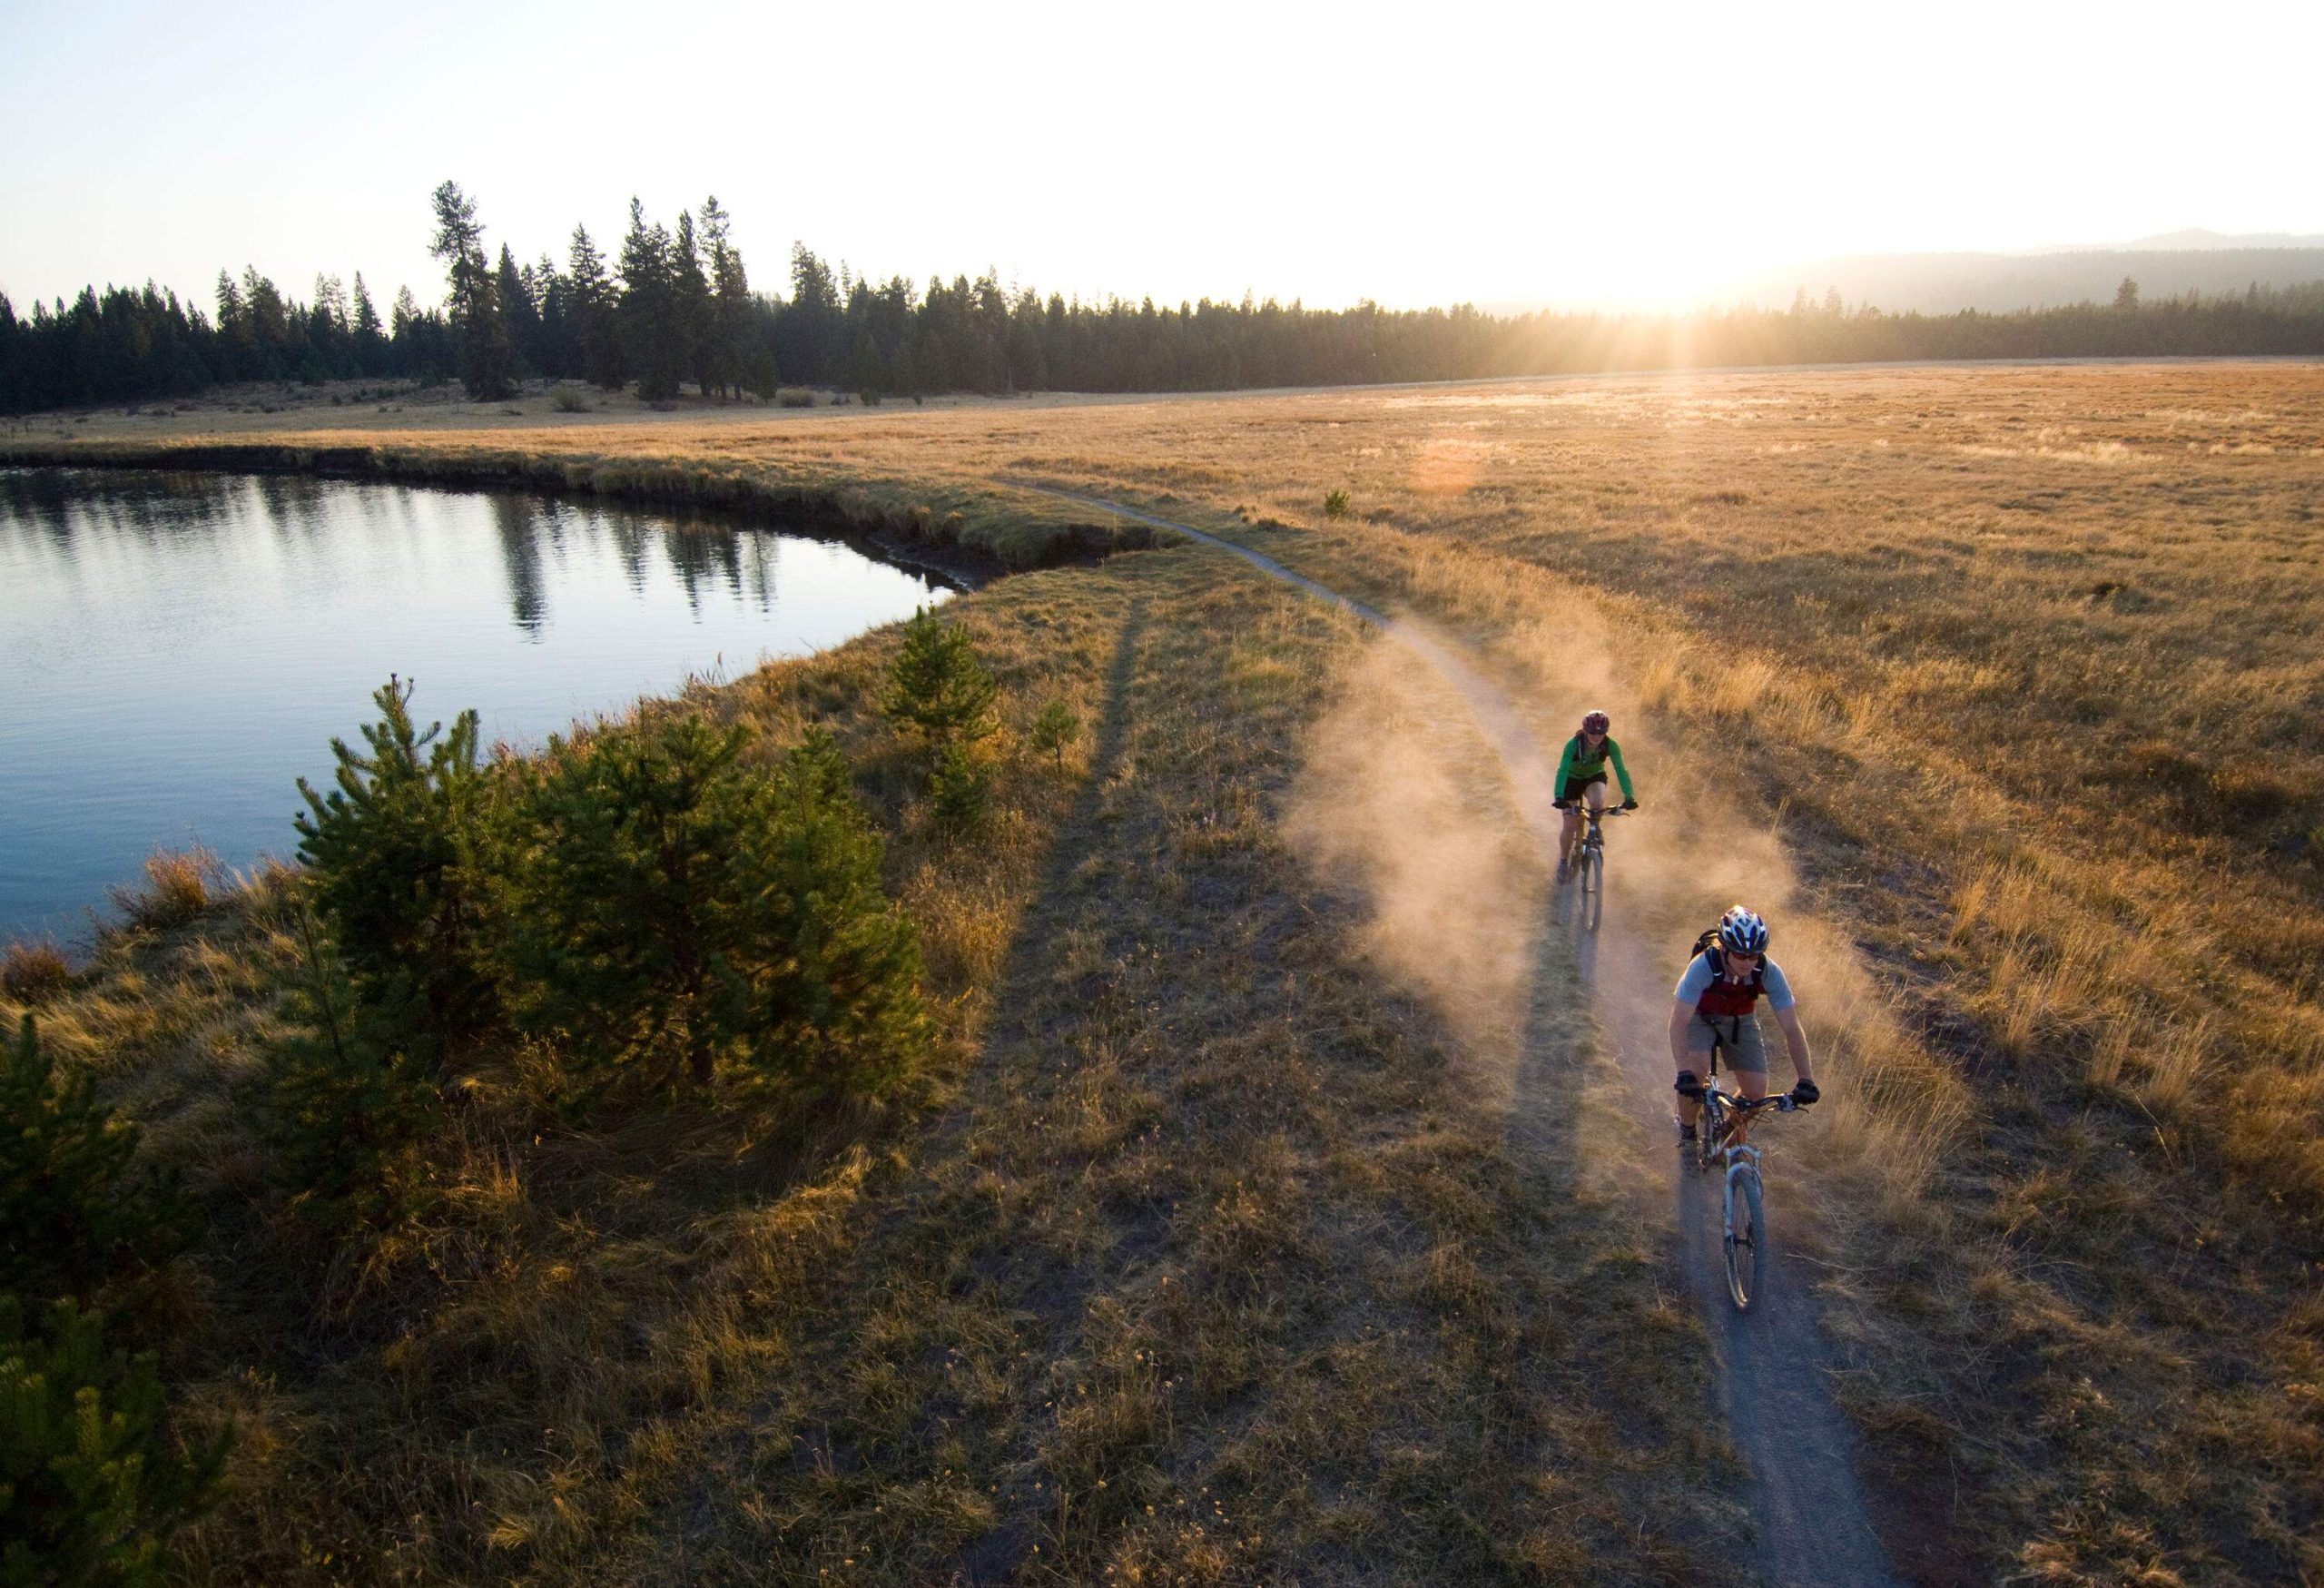 Two cyclists travel on a dusty trail along a calm lake.